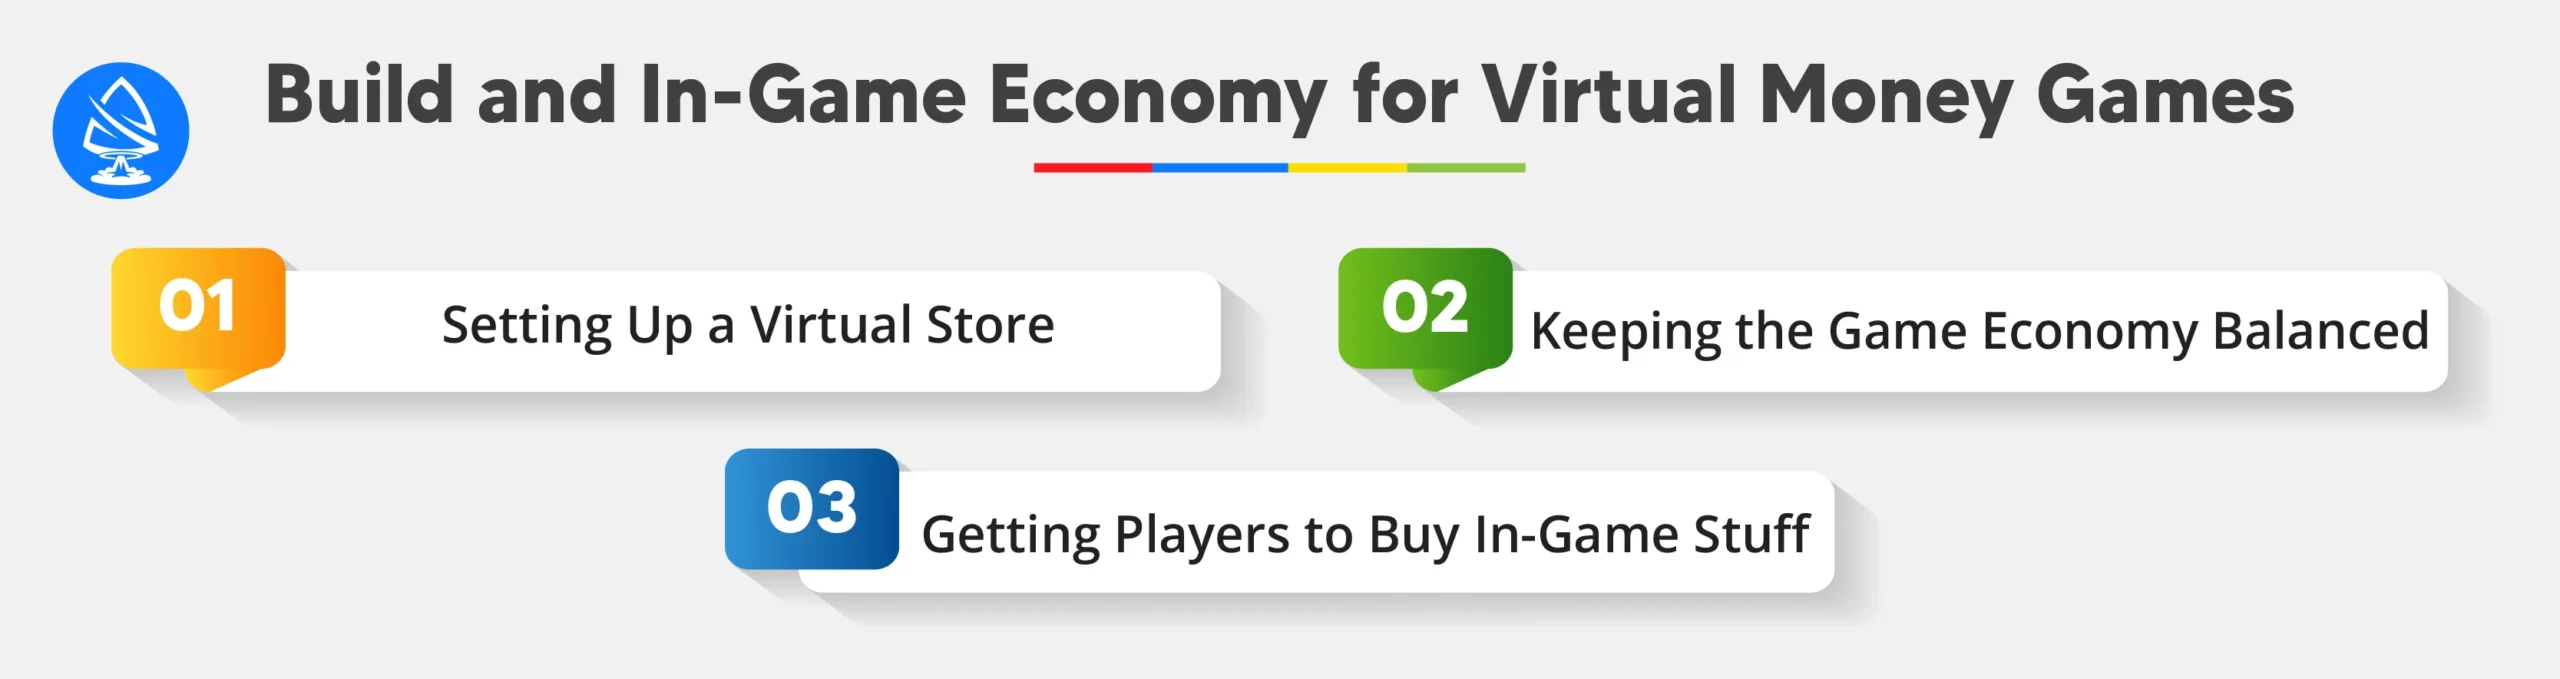 Building an In-Game Economy for Virtual Money Games - Make money